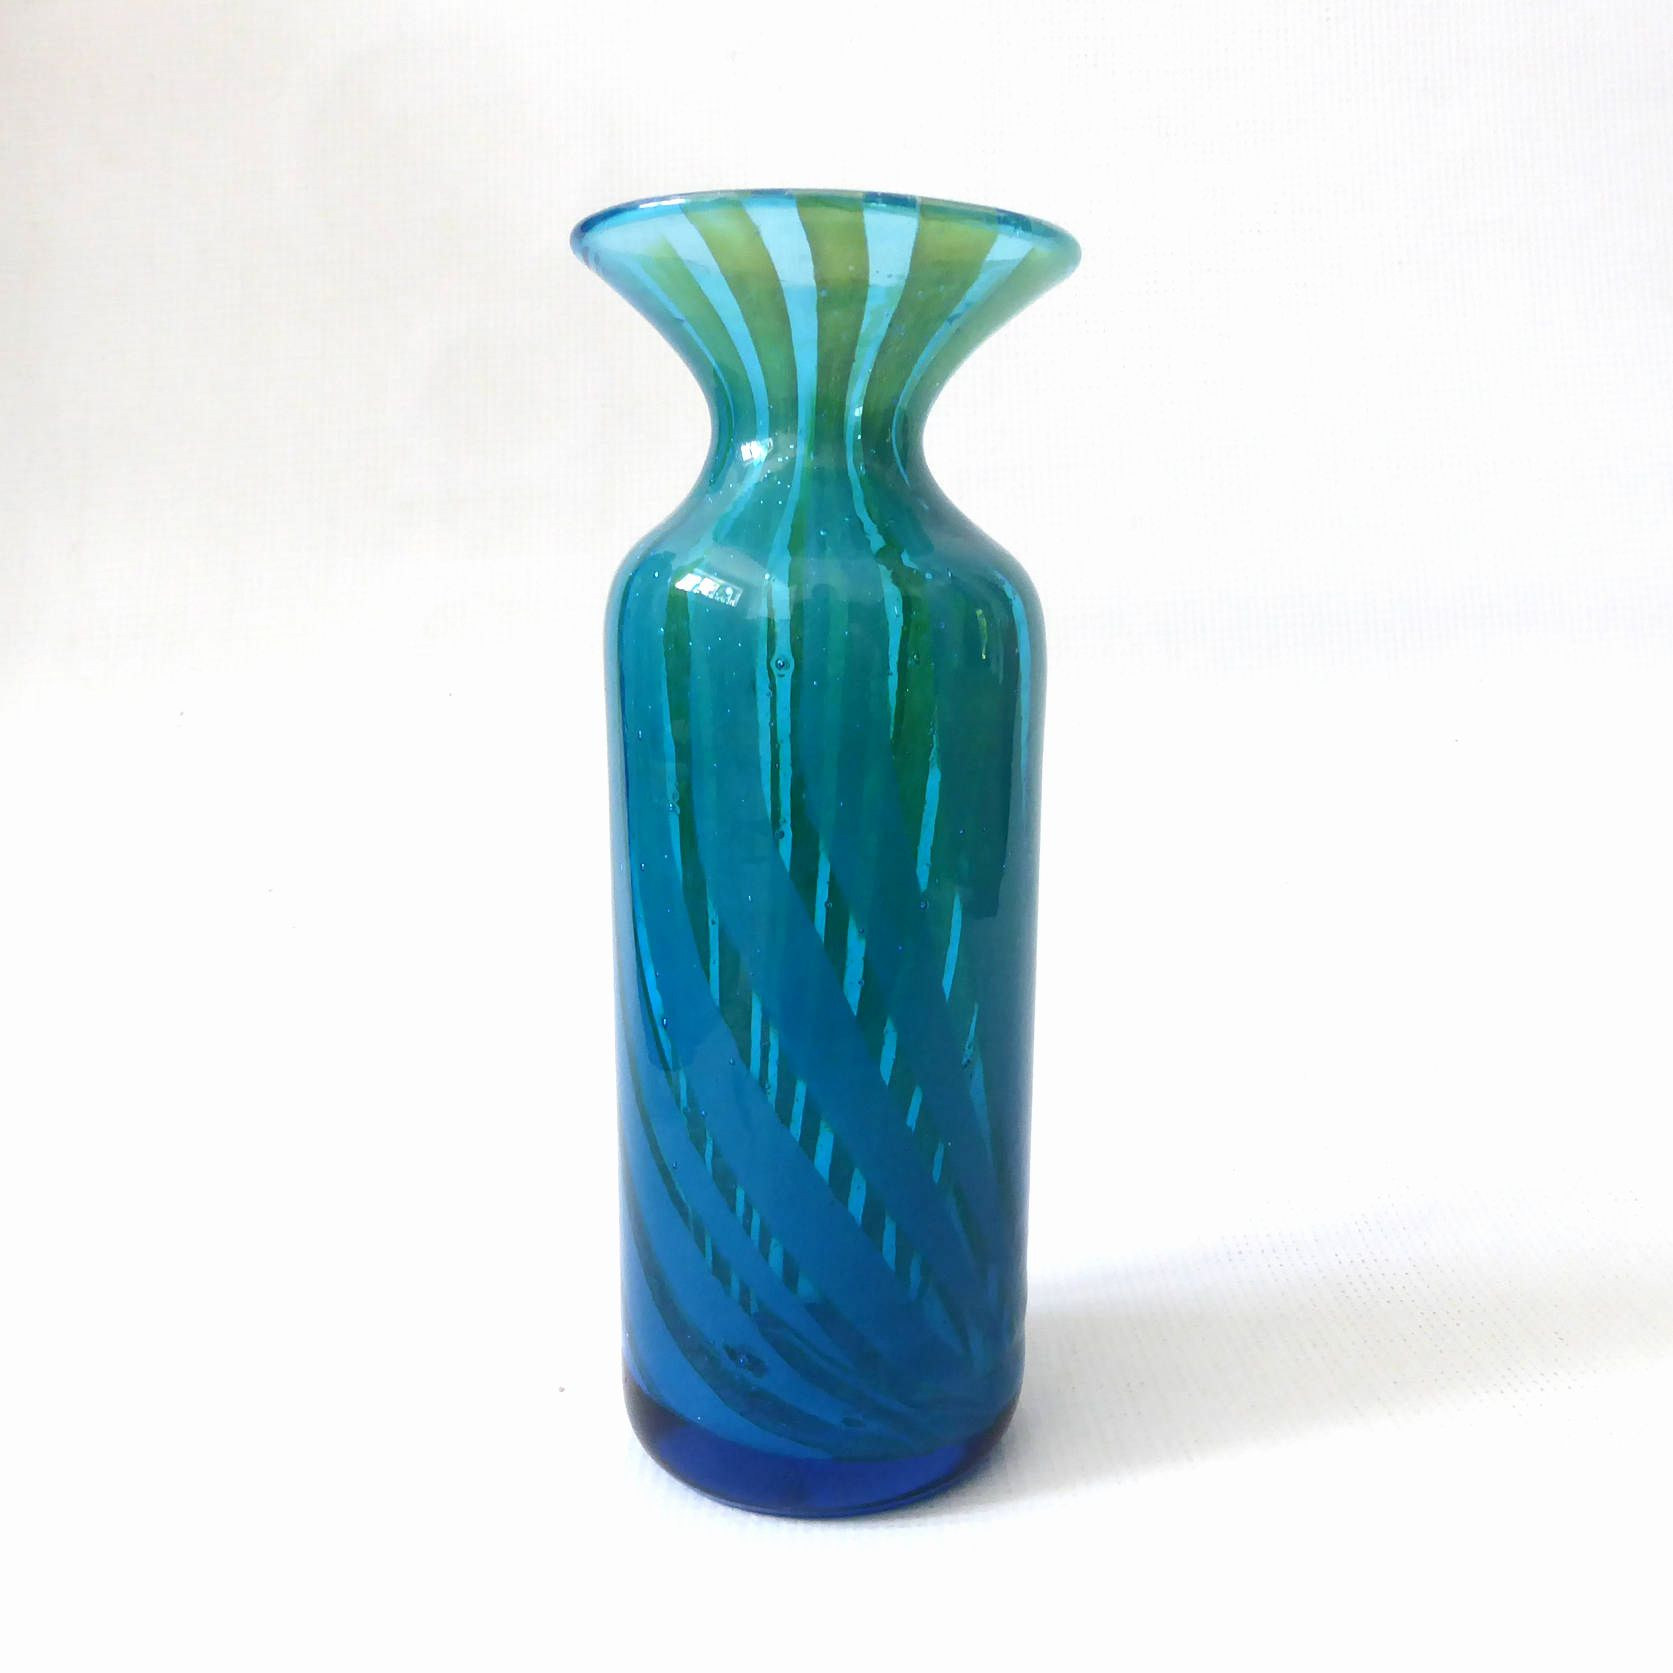 28 Unique Small Green Glass Vase 2024 free download small green glass vase of 35 antique green glass vases the weekly world in antique glass vases identify vase and cellar image avorcor